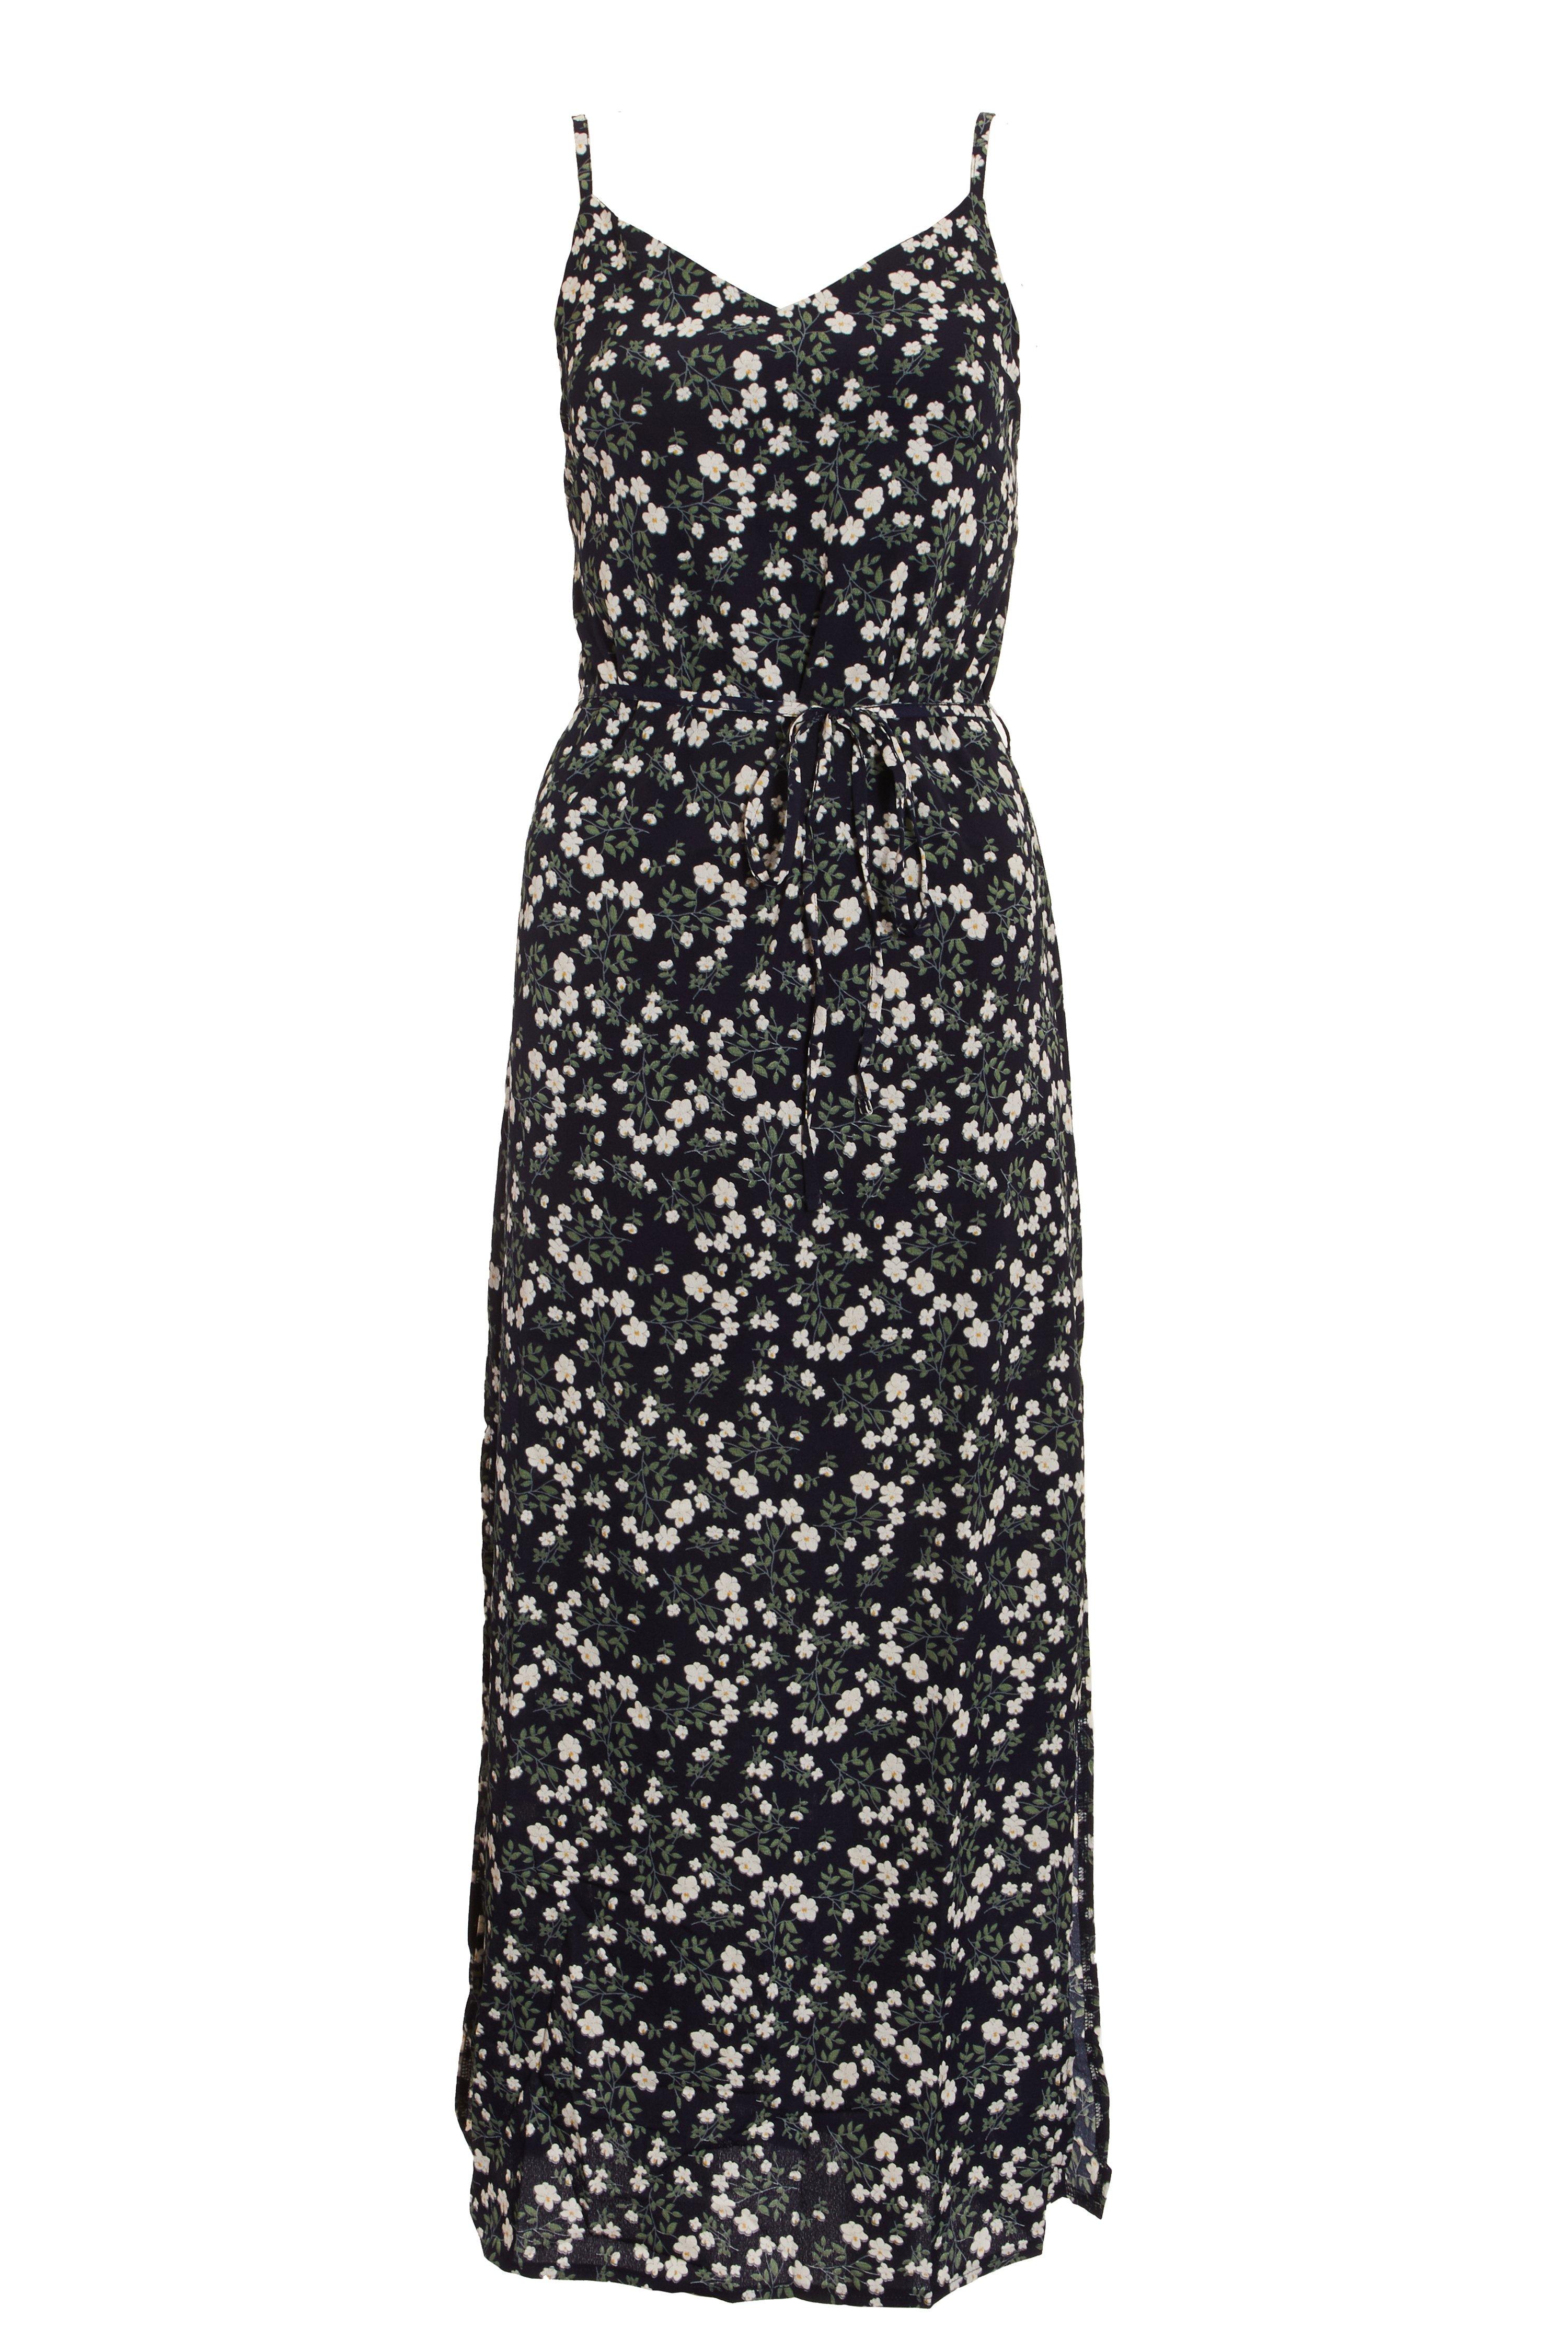 Navy & White Ditsy Floral Dress - Quiz Clothing